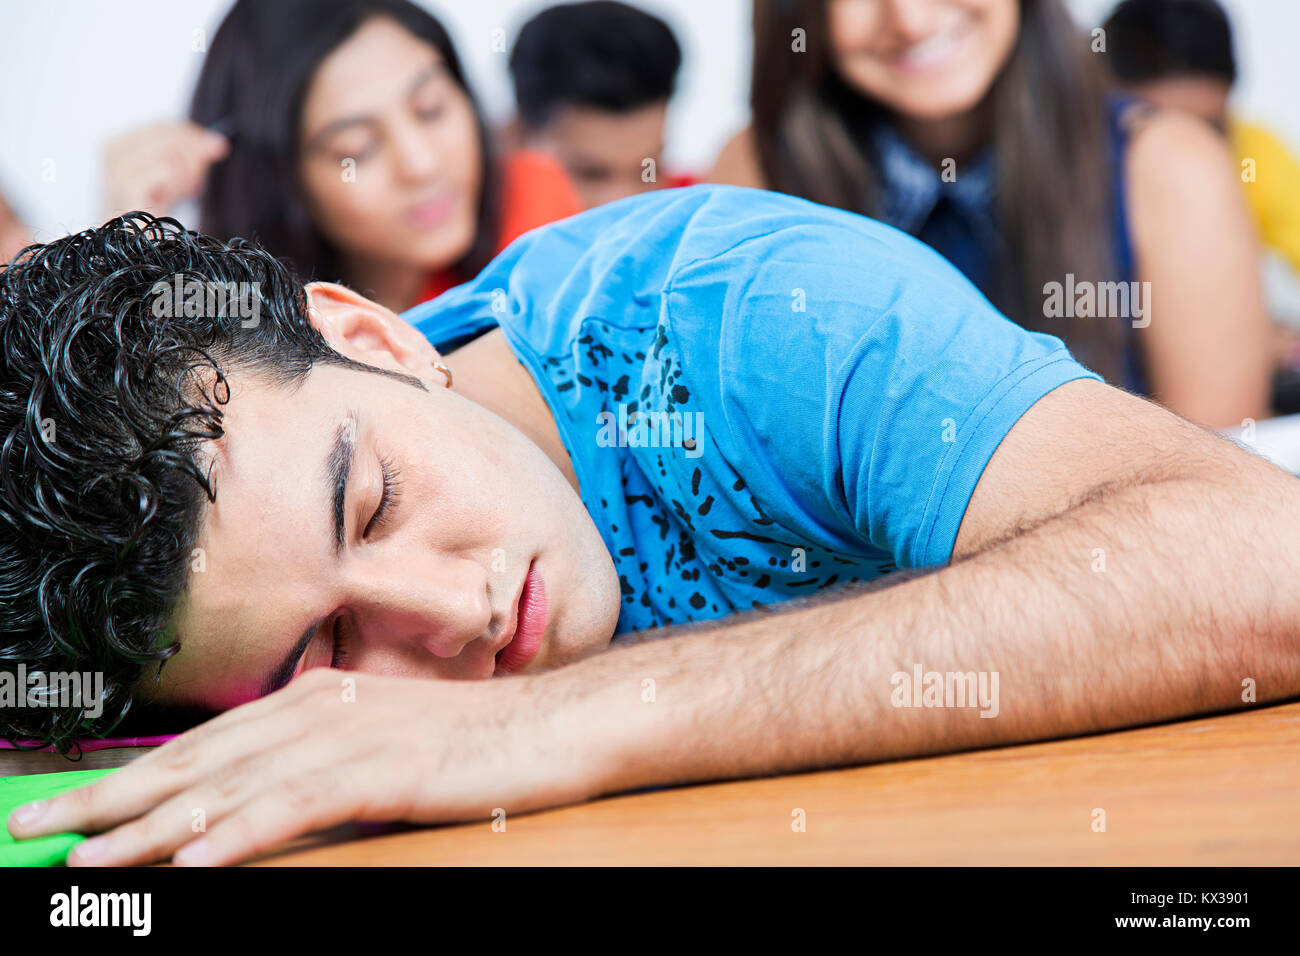 1 Indian College Teenager Girl Student Sleeping In Class Careless Stock Photo